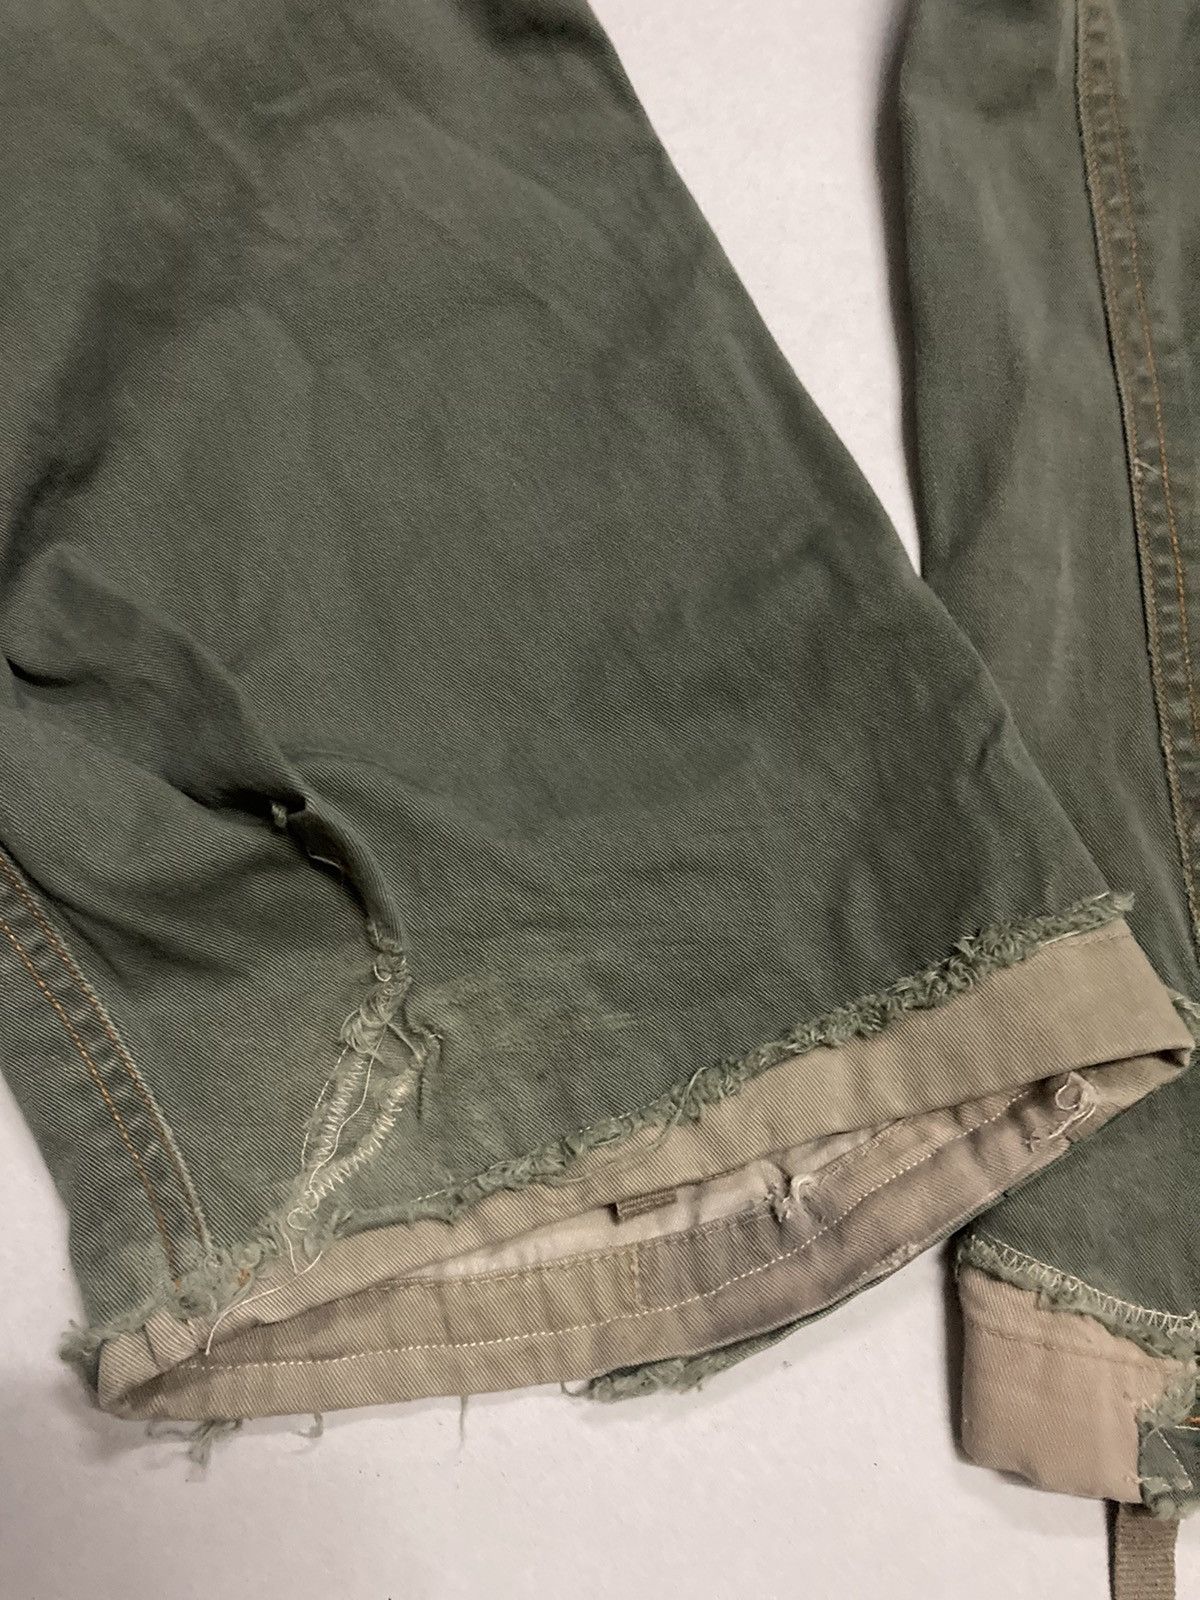 Vintage Soldout Japanese Brand Large Pocket Army Style Pants - 15